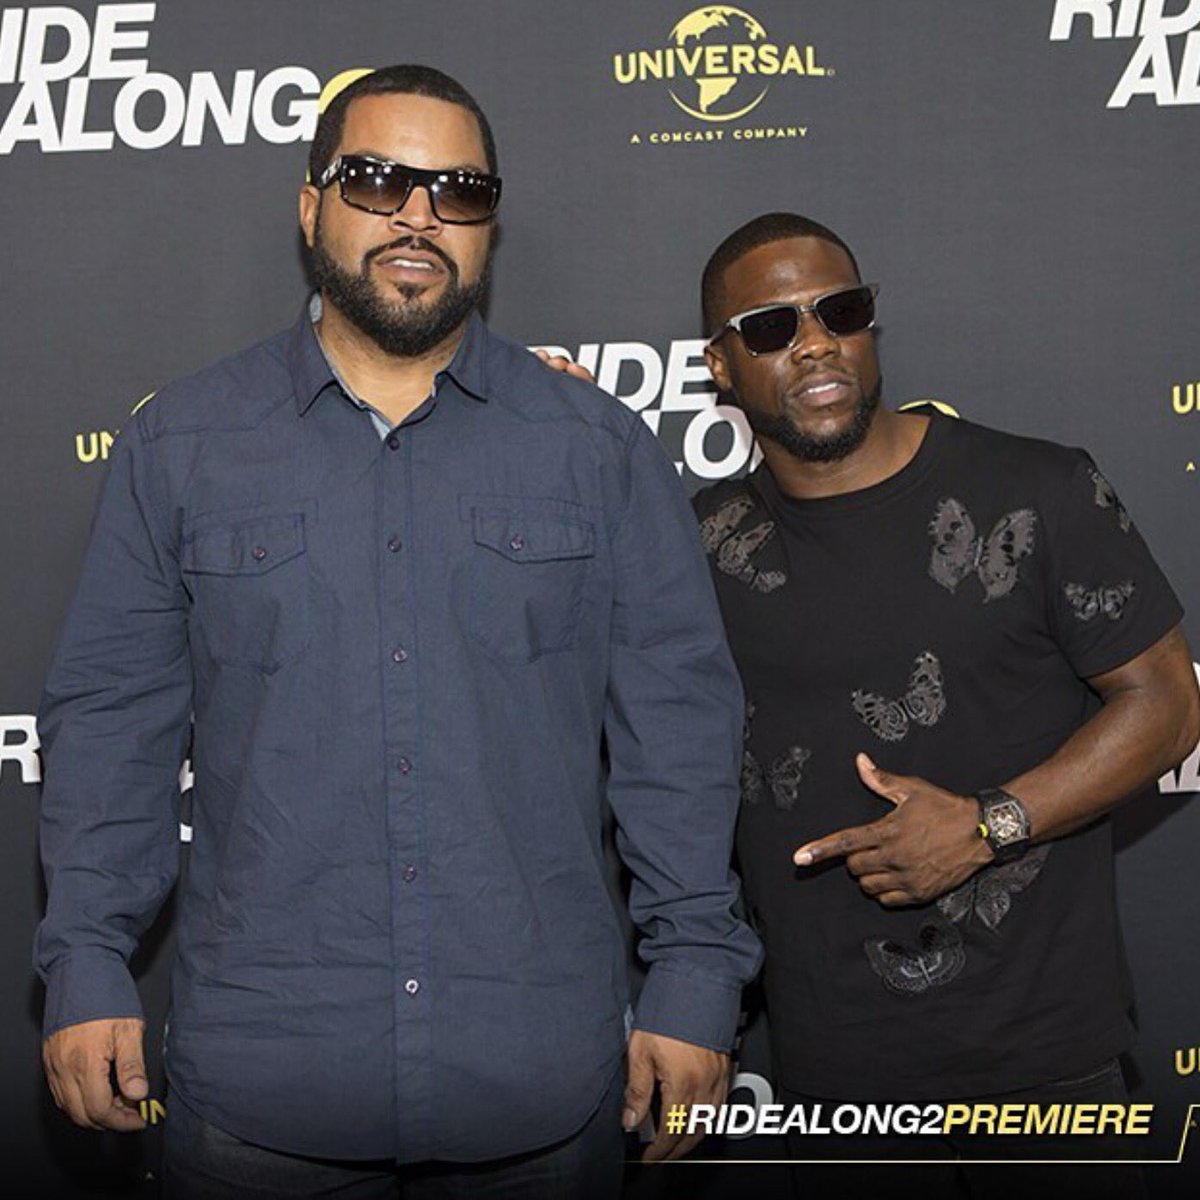 Wanna see me & @kevinhart4real clowning in Australia?????????https://t.co/UlzZ3M1Ytc #ridealong2tour #RideAlong2 out now! https://t.co/J4OINslshS